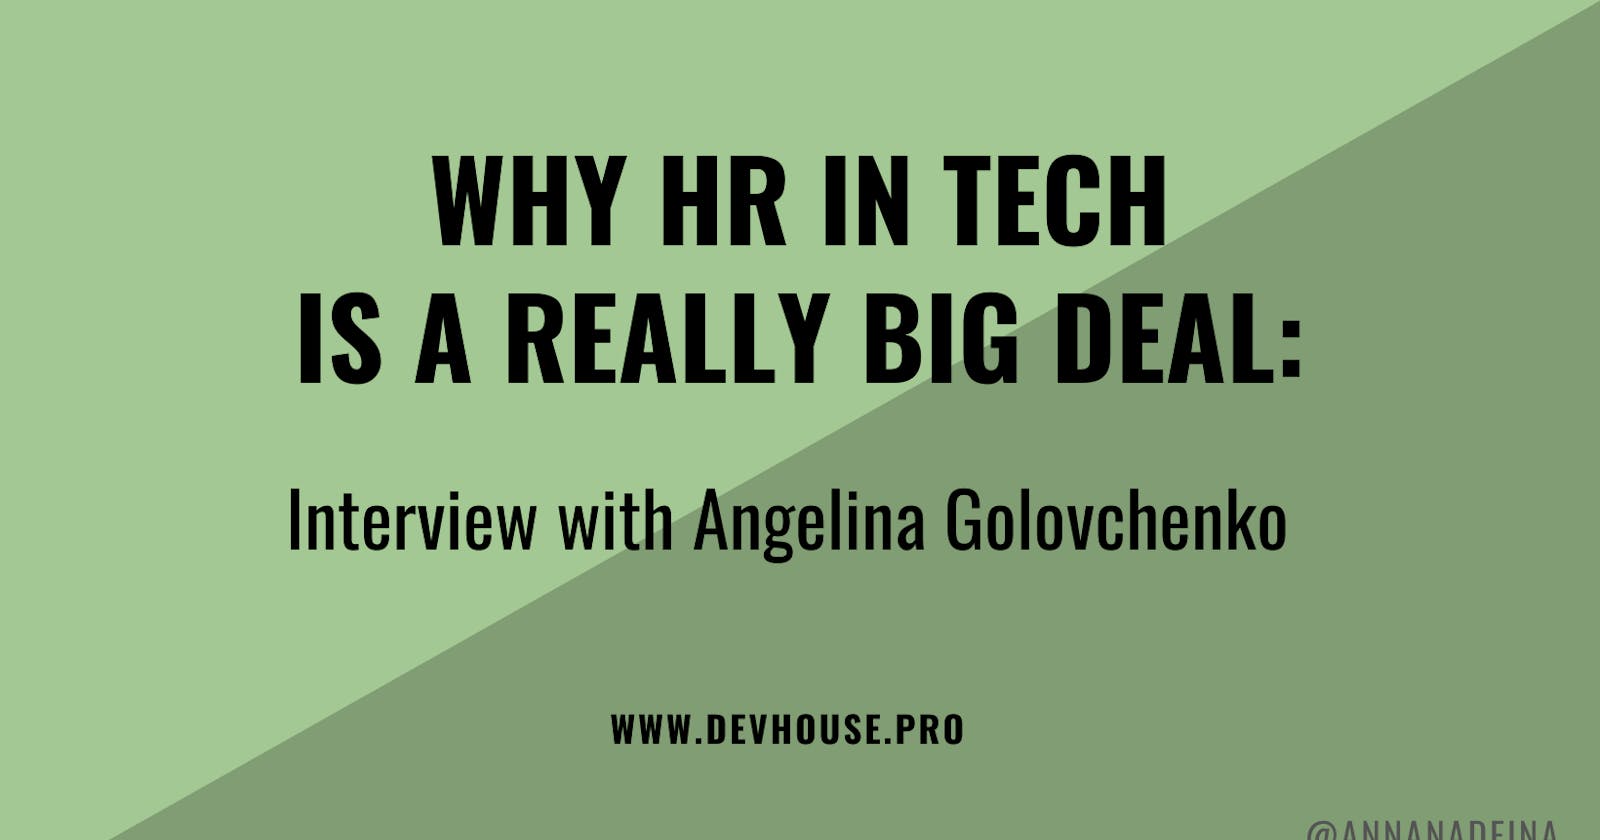 Why HR in tech is a really big deal. Interview with Angelina Golovchenko.